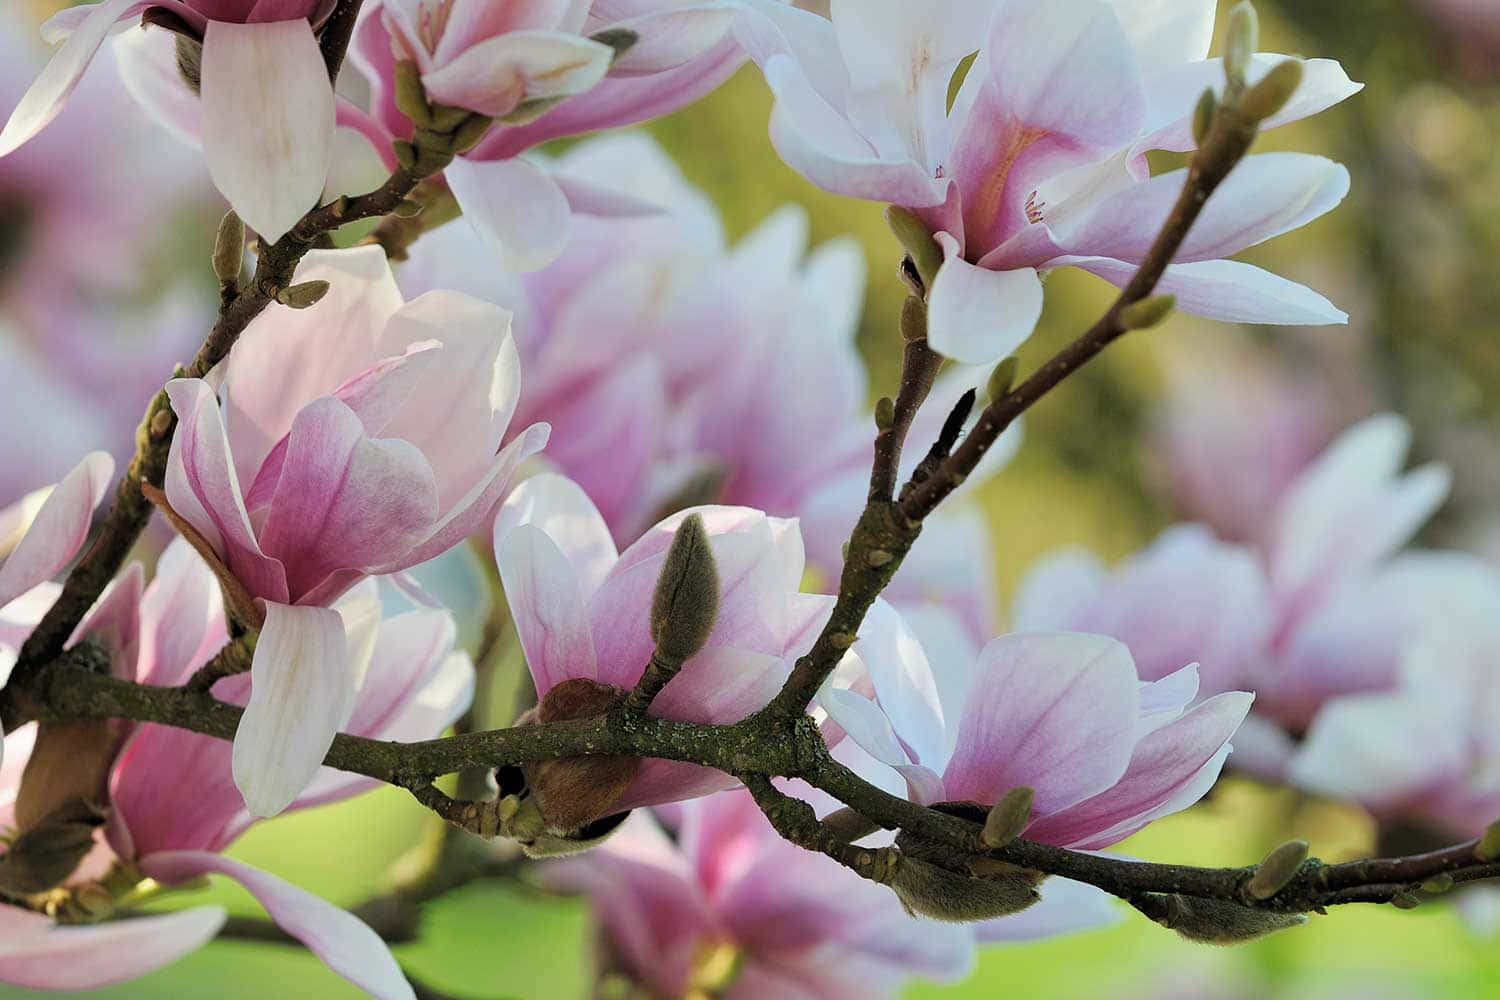 A feast for the eyes: delicate magnolia blossoms